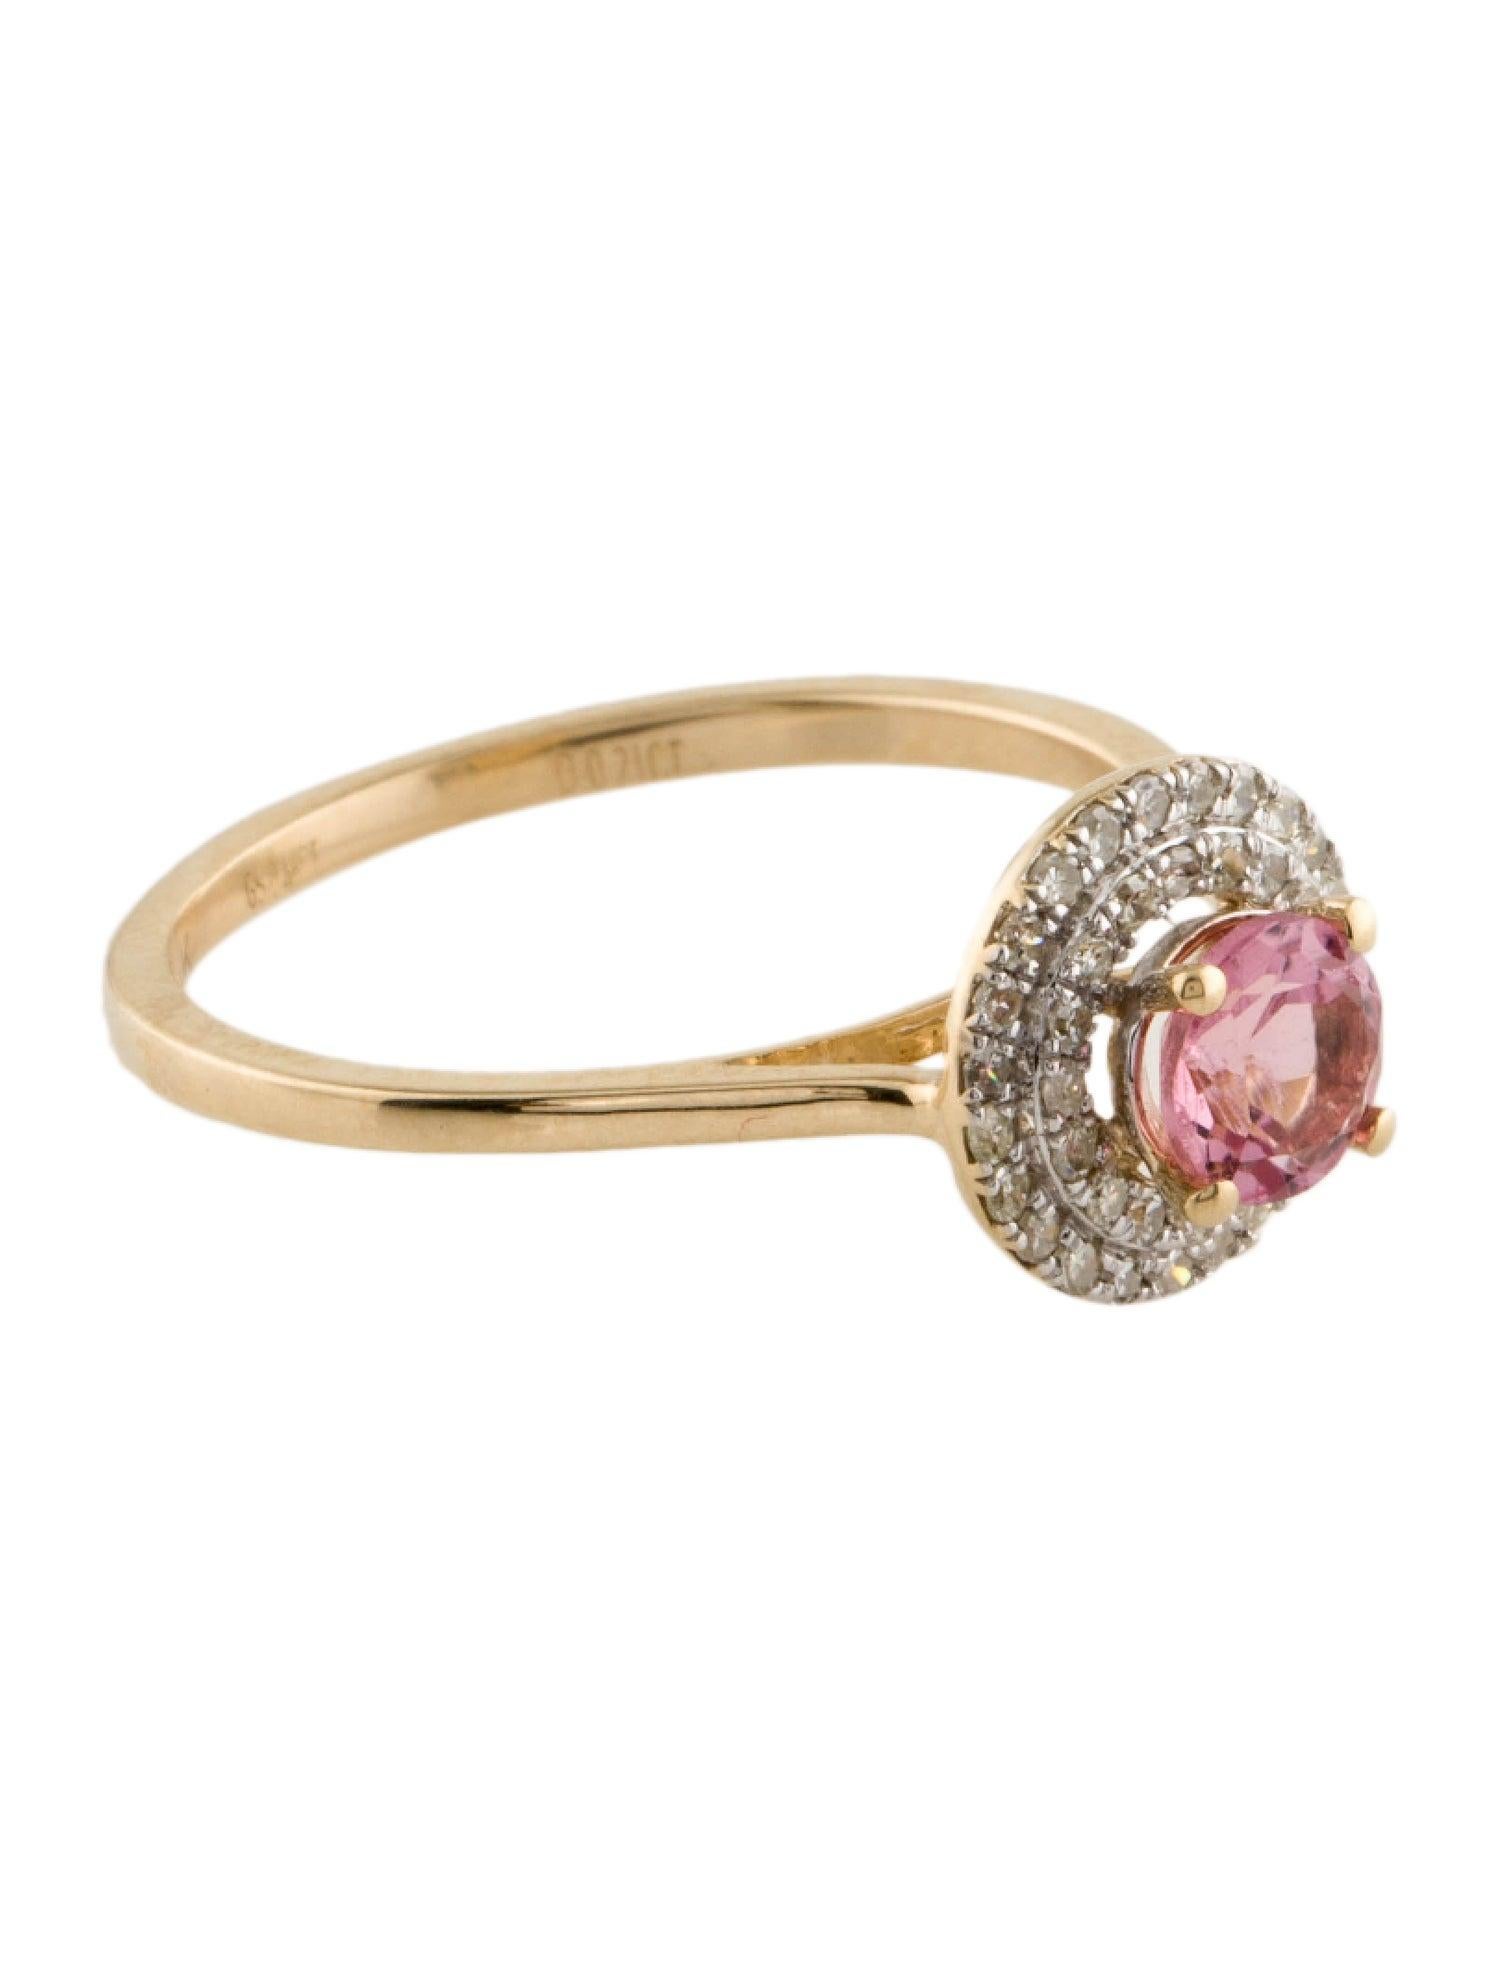 Step into a world of vibrant enchantment with our Rainbow Gemstone Radiance Pink Tourmaline and Diamond Ring. As part of our exquisite collection, this ring is more than just jewelry; it's a celebration of nature's kaleidoscope of colors and the